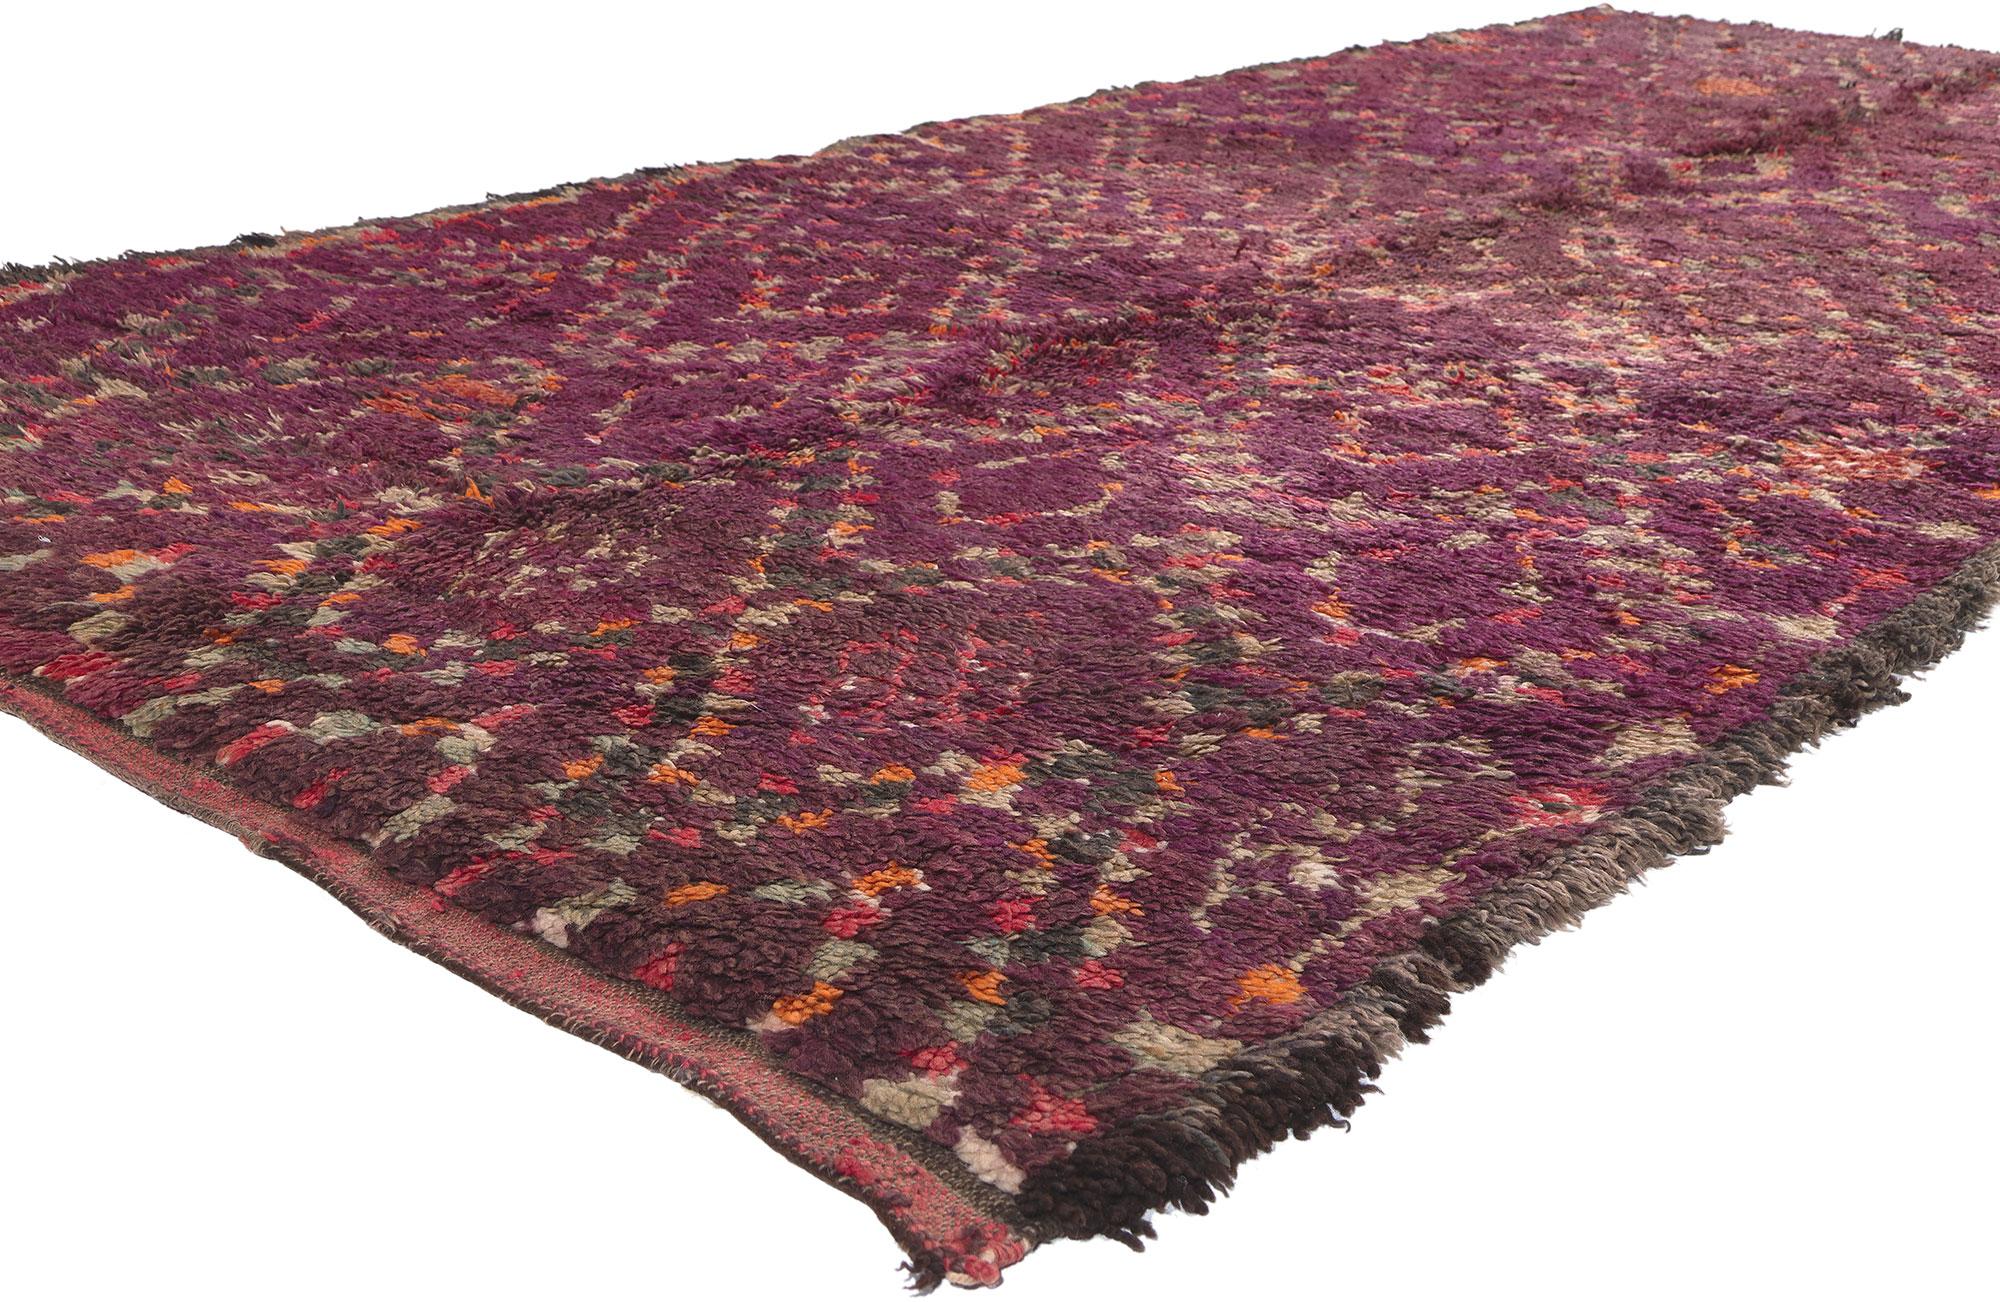 20150 Vintage Purple Beni MGuild Moroccan Rug, 05'02 x 11'01. Originating from the Beni M'Guild tribe nestled in Morocco's Middle Atlas Mountains, Beni M'Guild rugs epitomize a cherished tradition meticulously handcrafted by skilled Berber women.